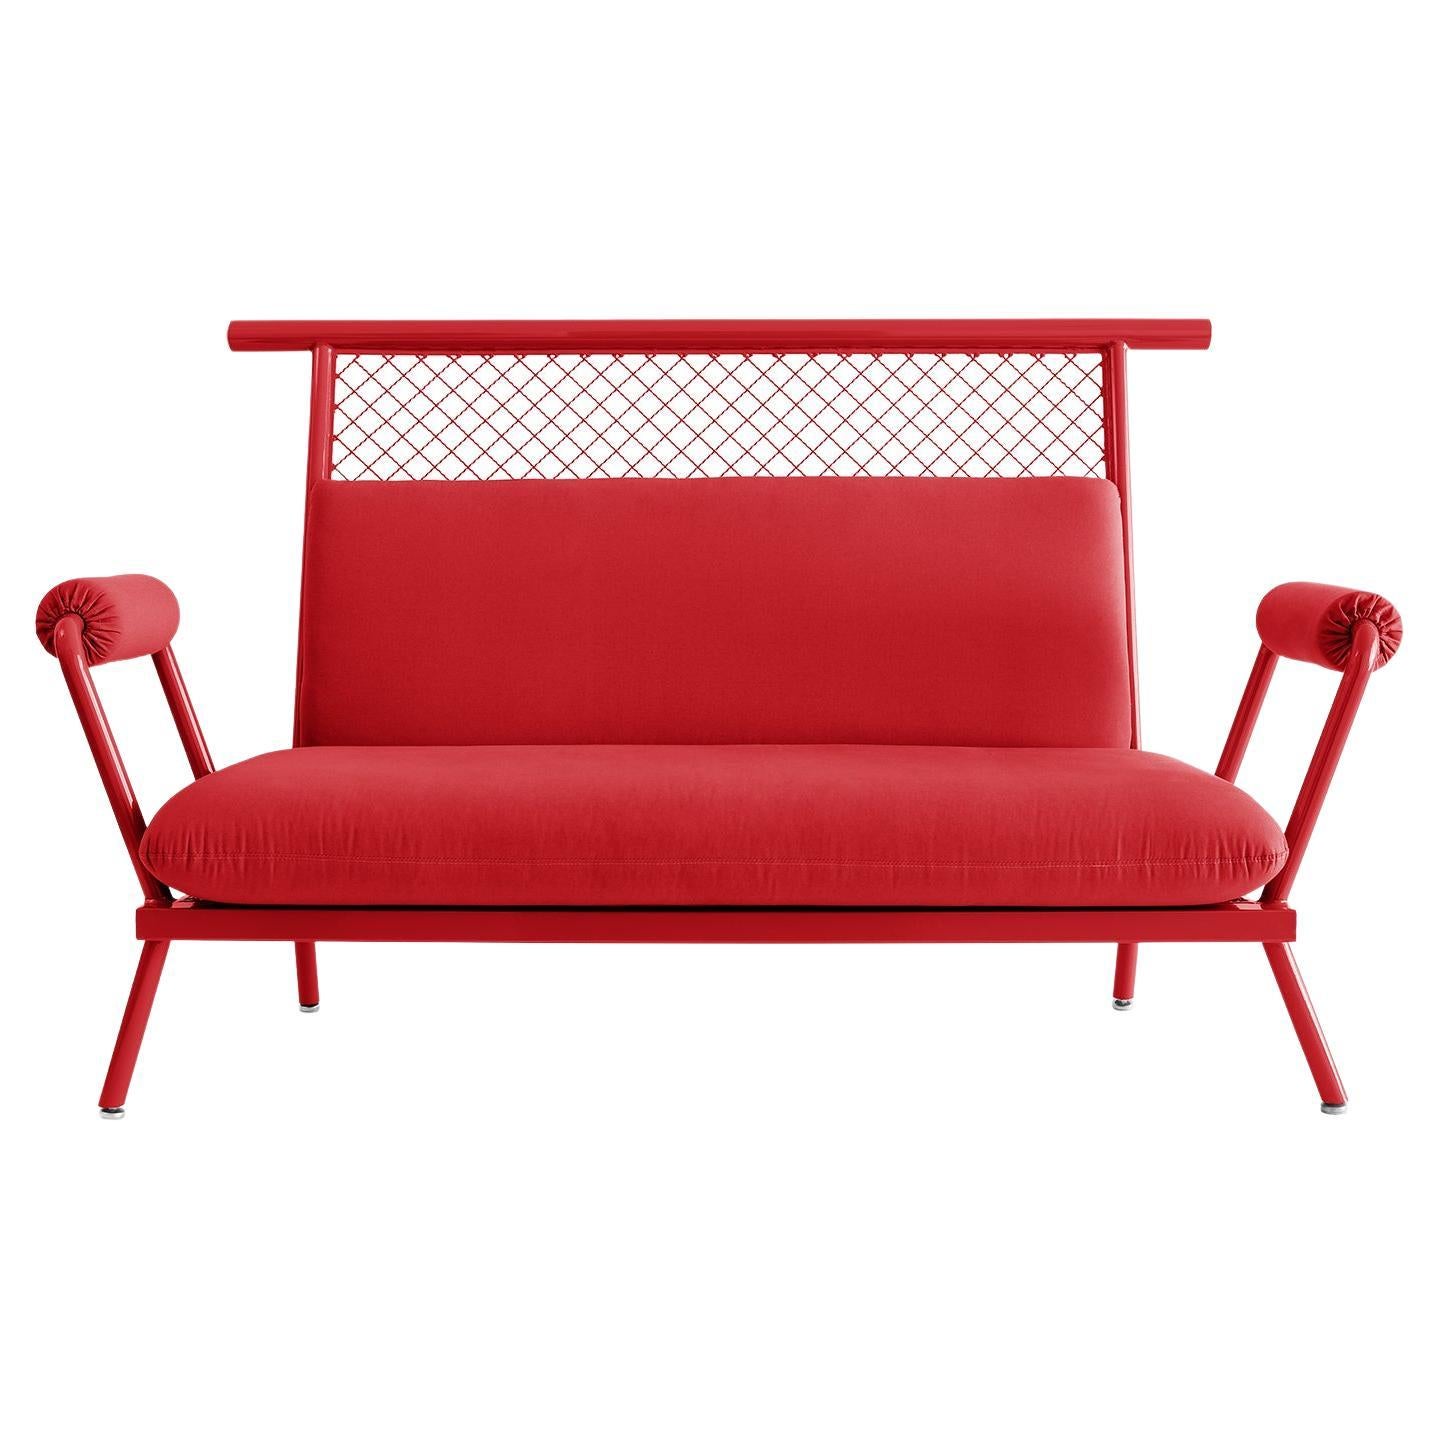 Handmade Red PK7 Sofa, Carbon Steel Structure and Metal Mesh by Paulo Kobylka For Sale